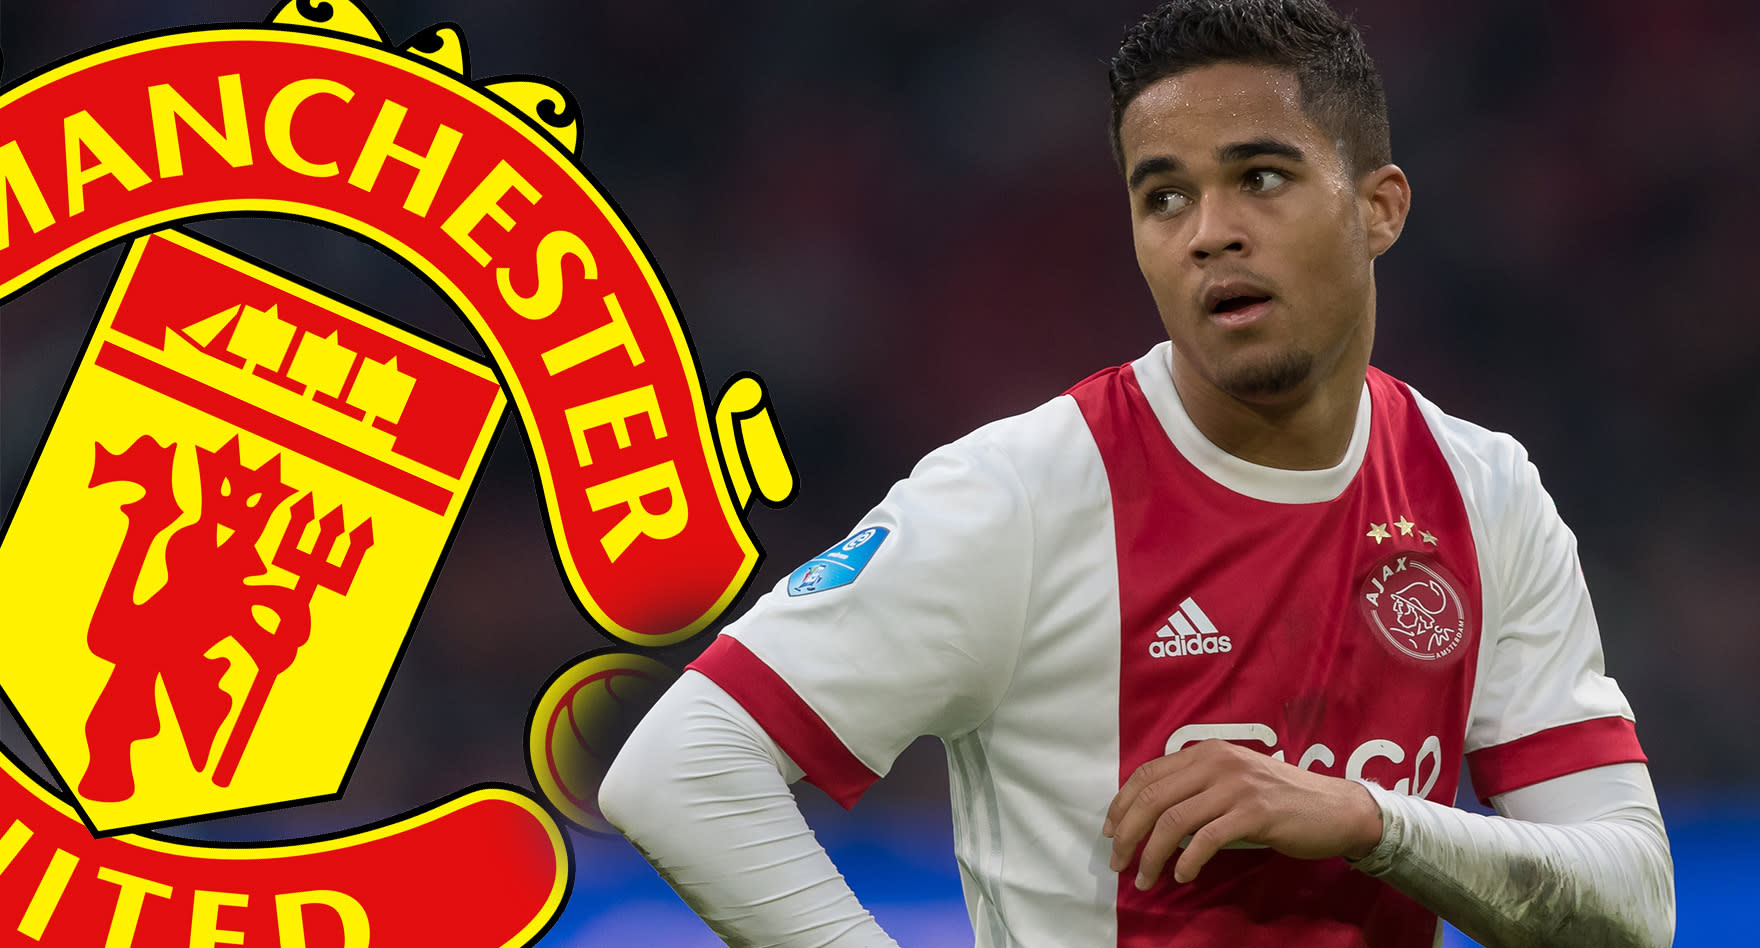 Exclusive: Manchester United add Justin Kluivert to January transfer window recruitment list